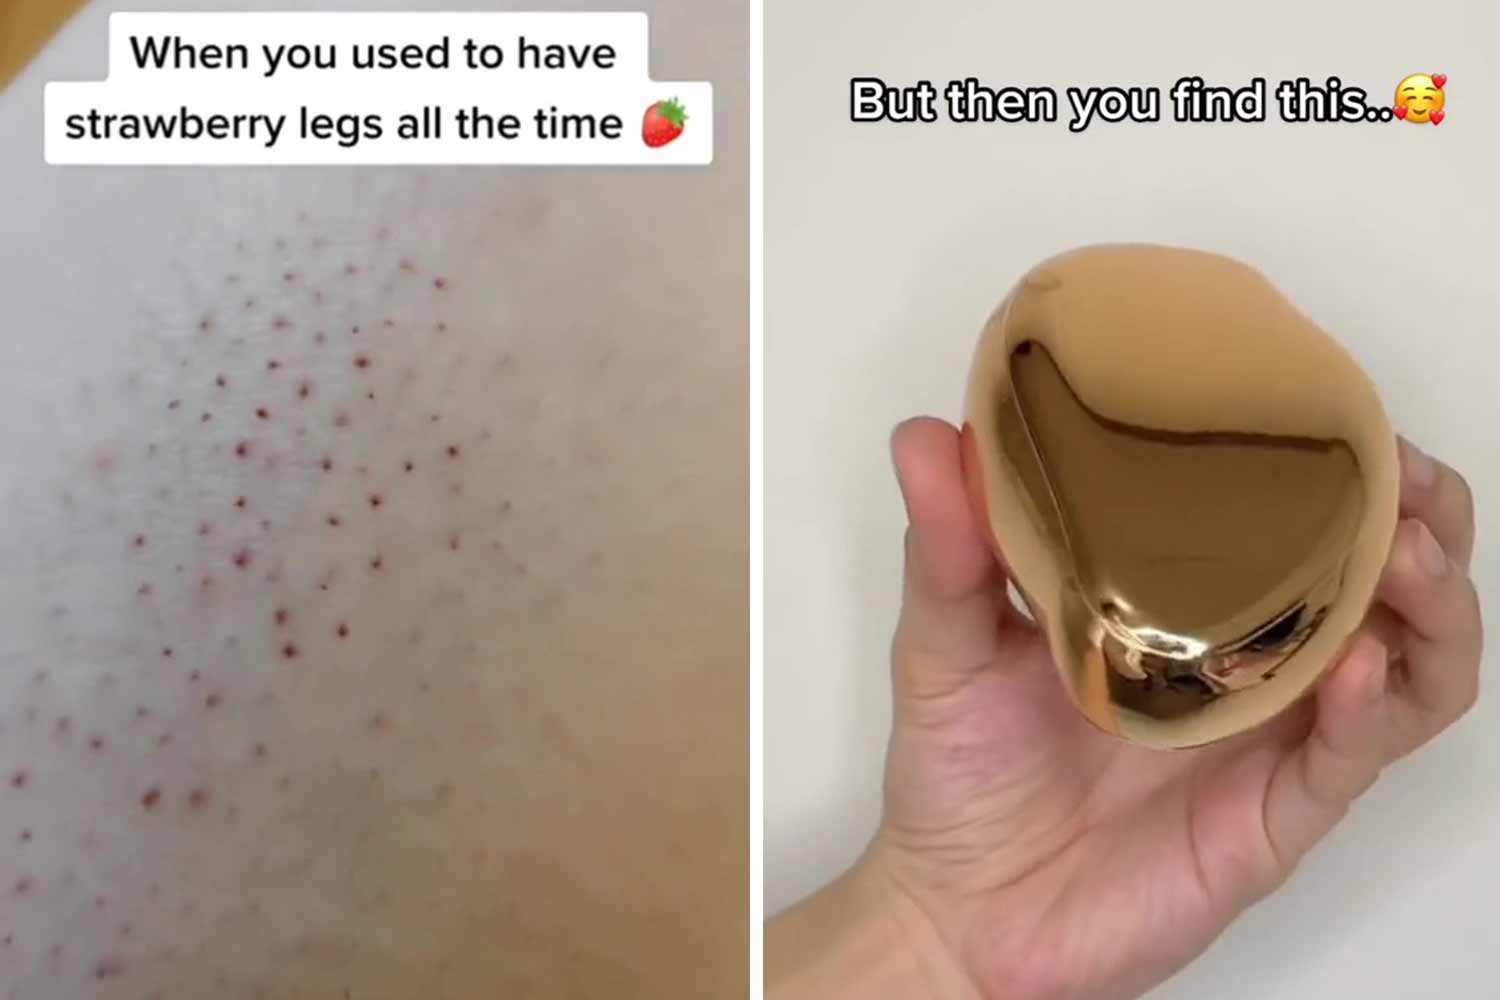 Beauty fans go crazy for a painless hair eraser that gets rid of strawberry legs